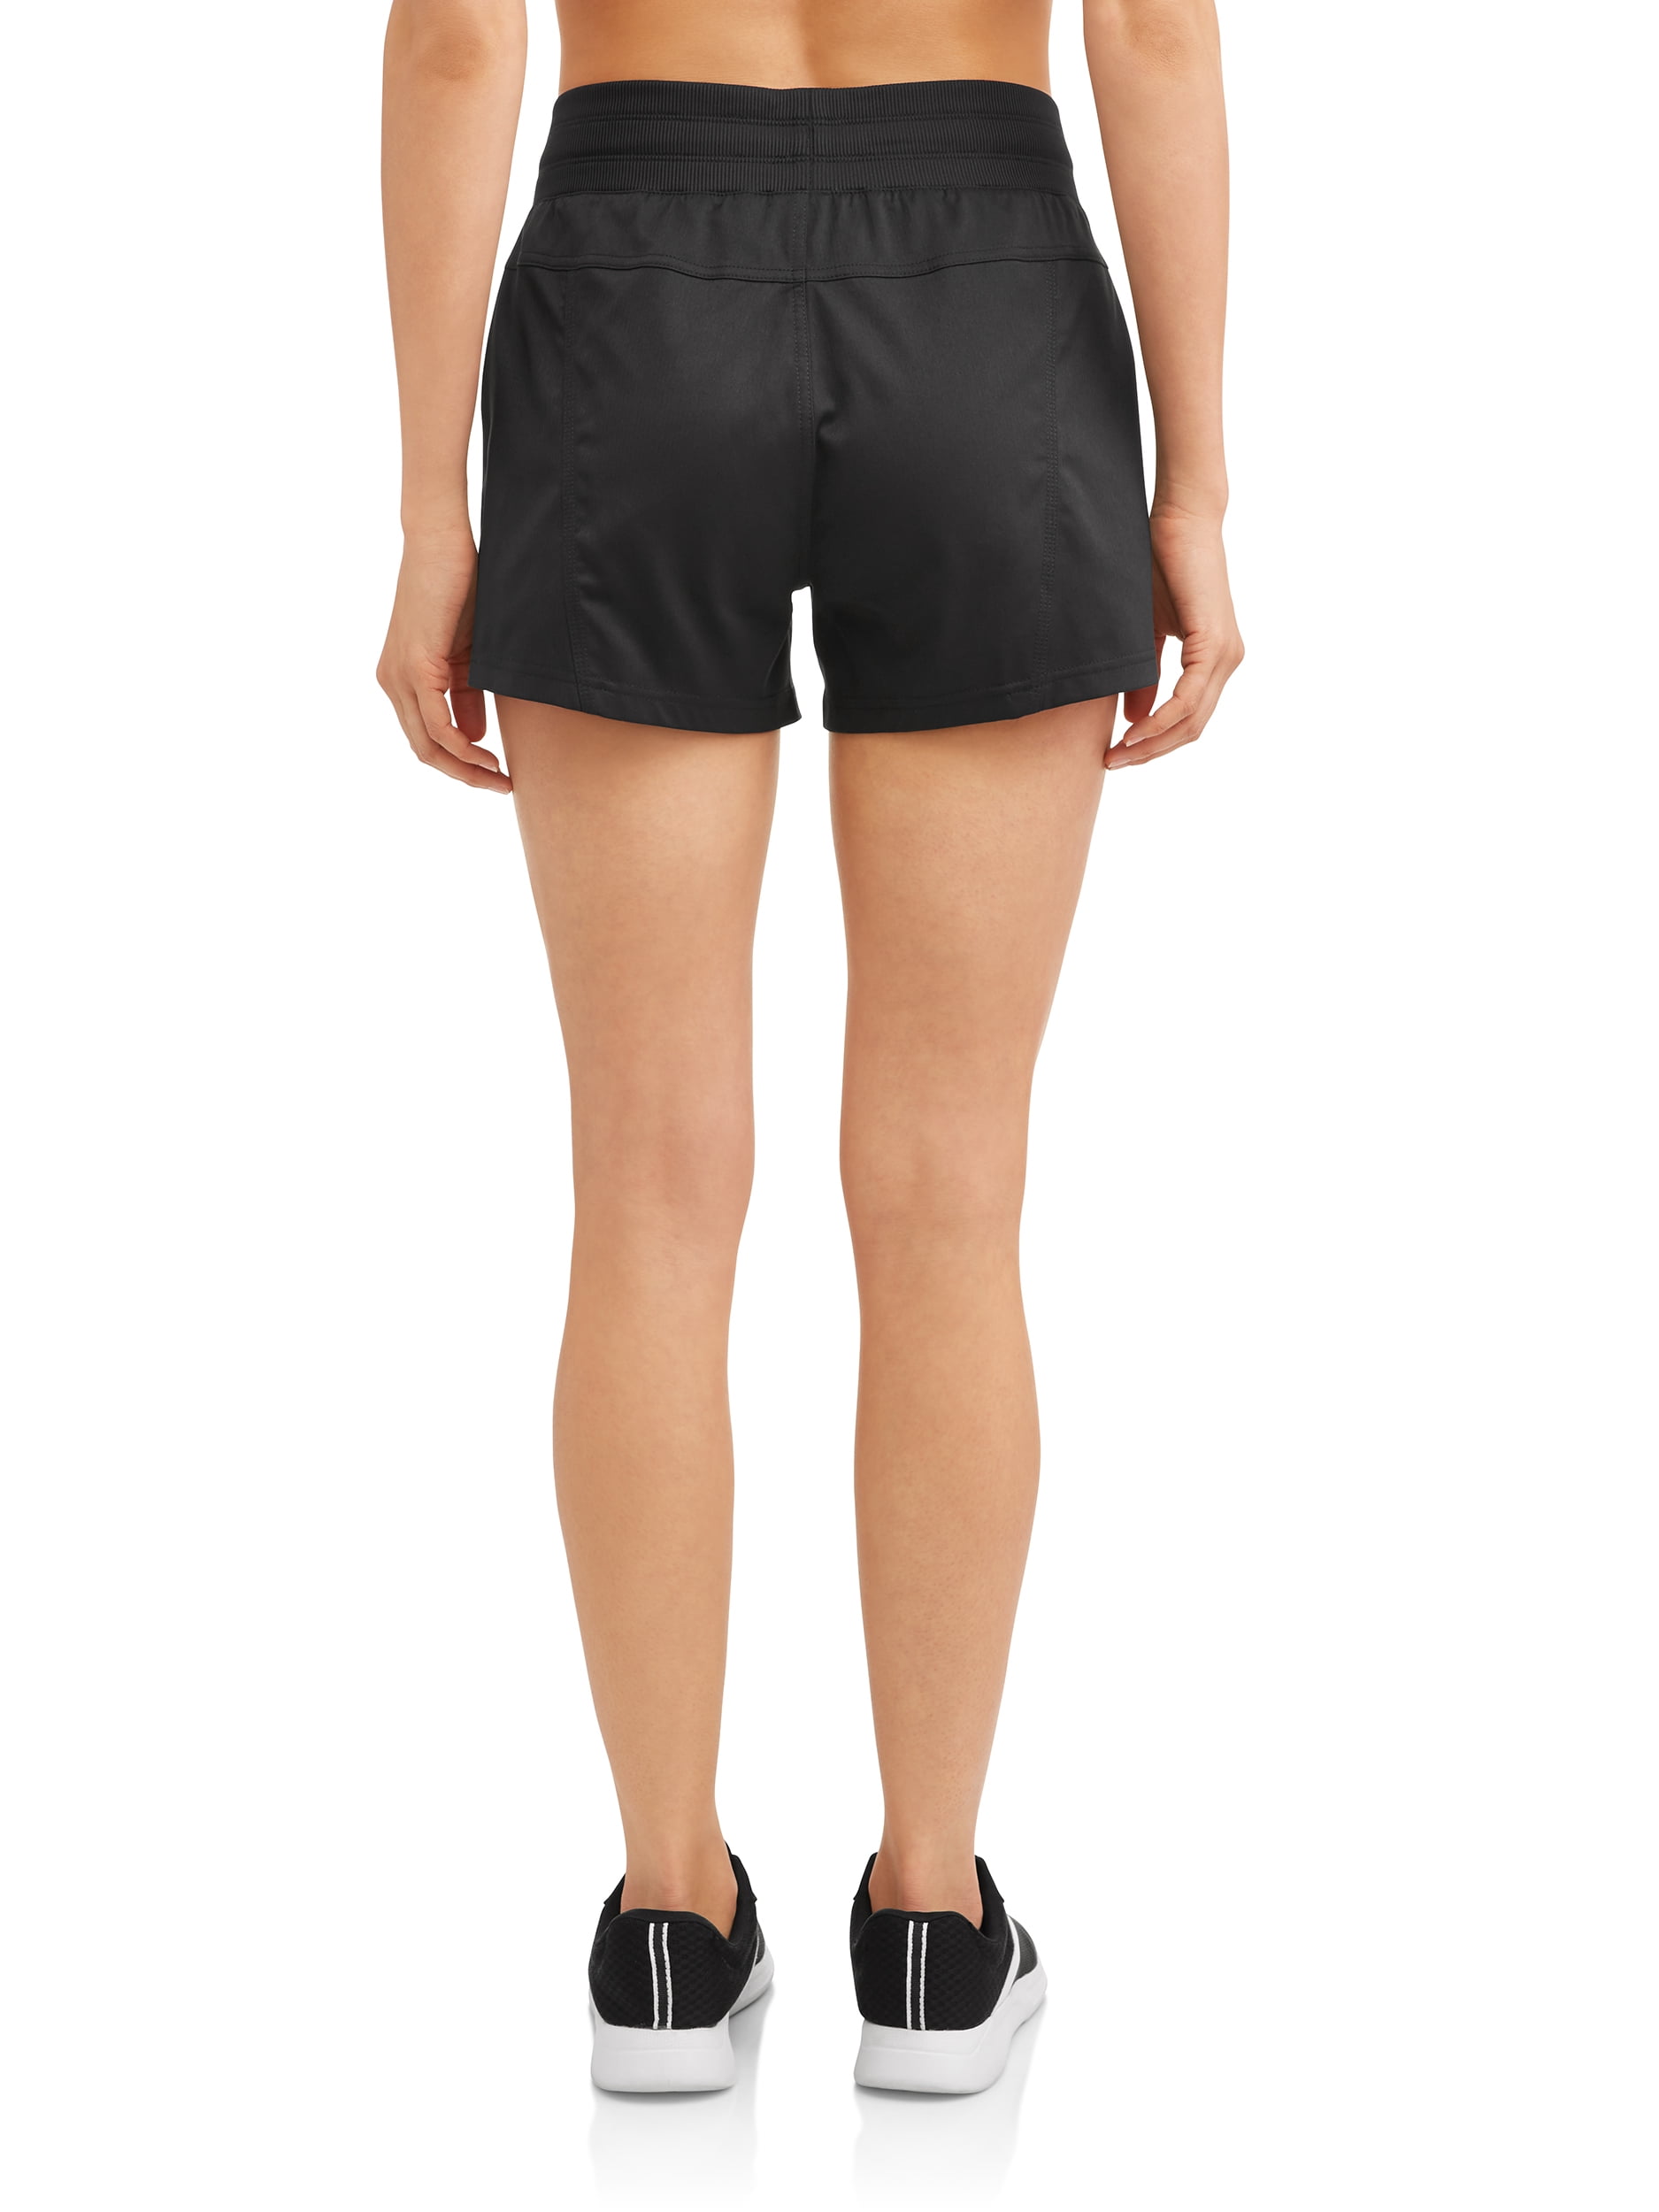 Athletic Works - Athletic Works Women's 